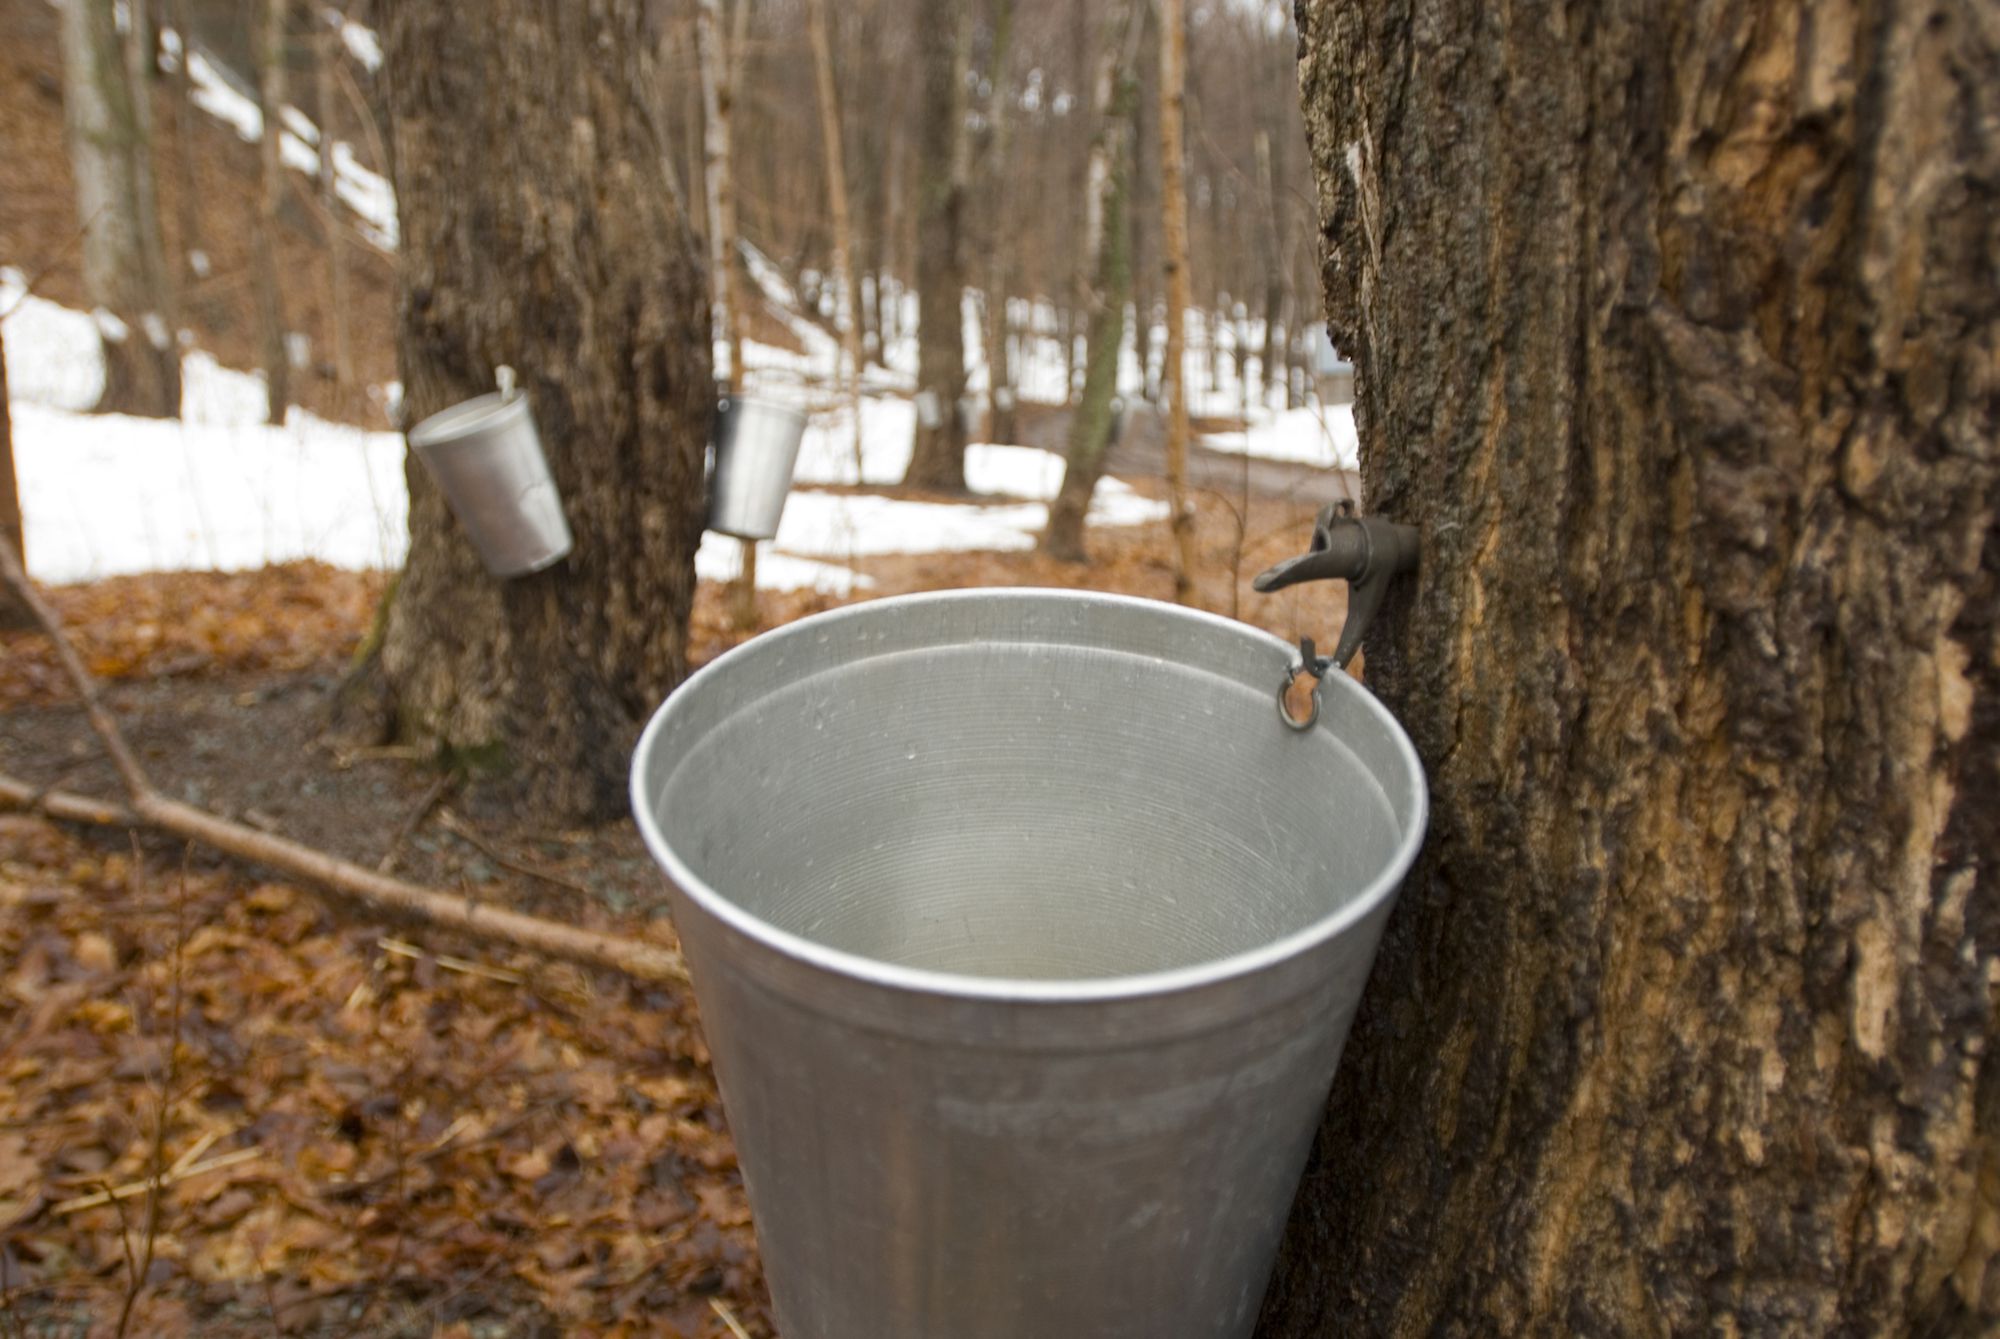 what types of maple trees produce syrup